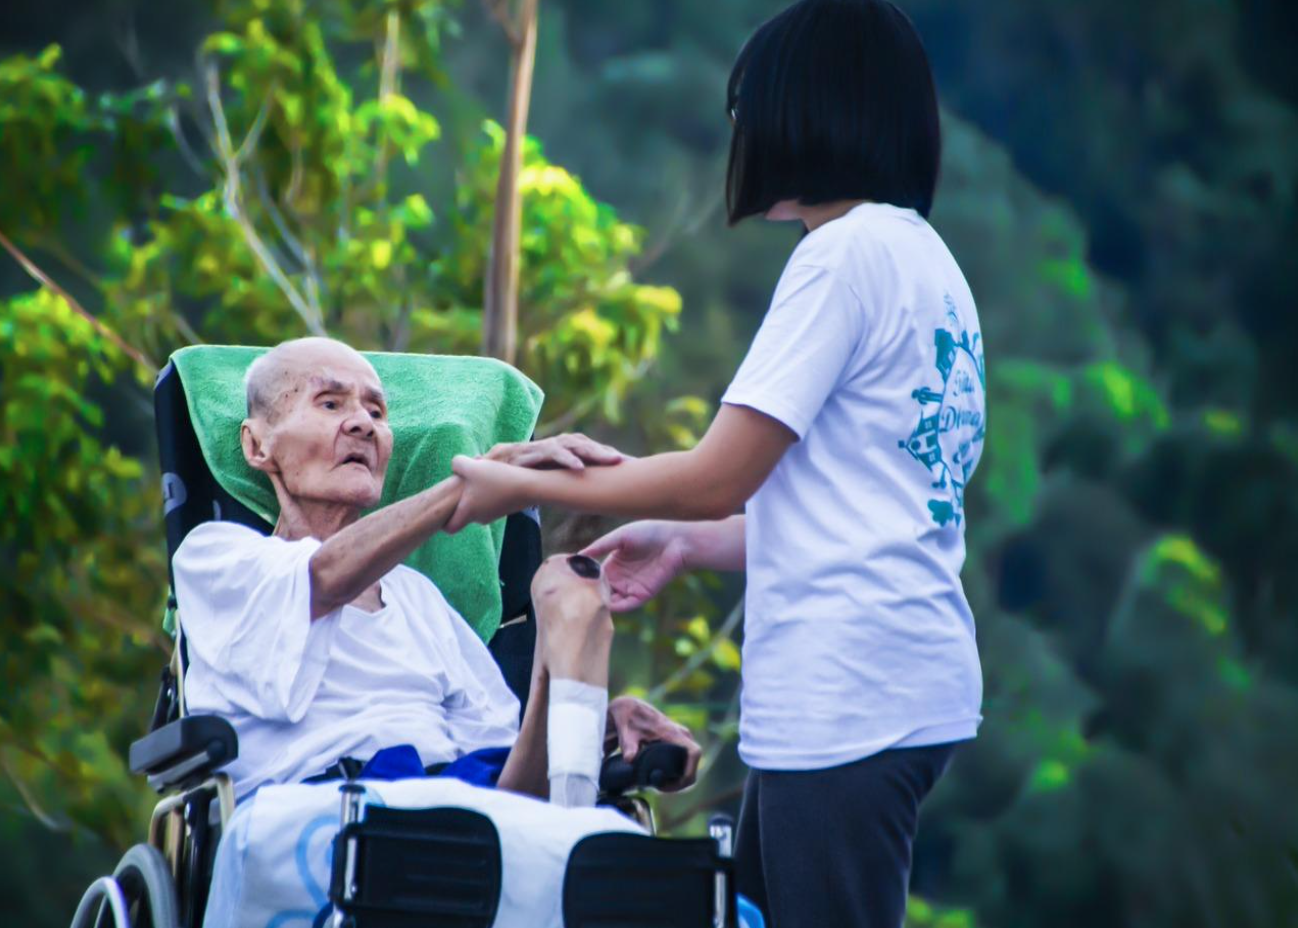 Hospice worker caring for elderly frail patient; image by Truthseeker08, via Pixabay.com.